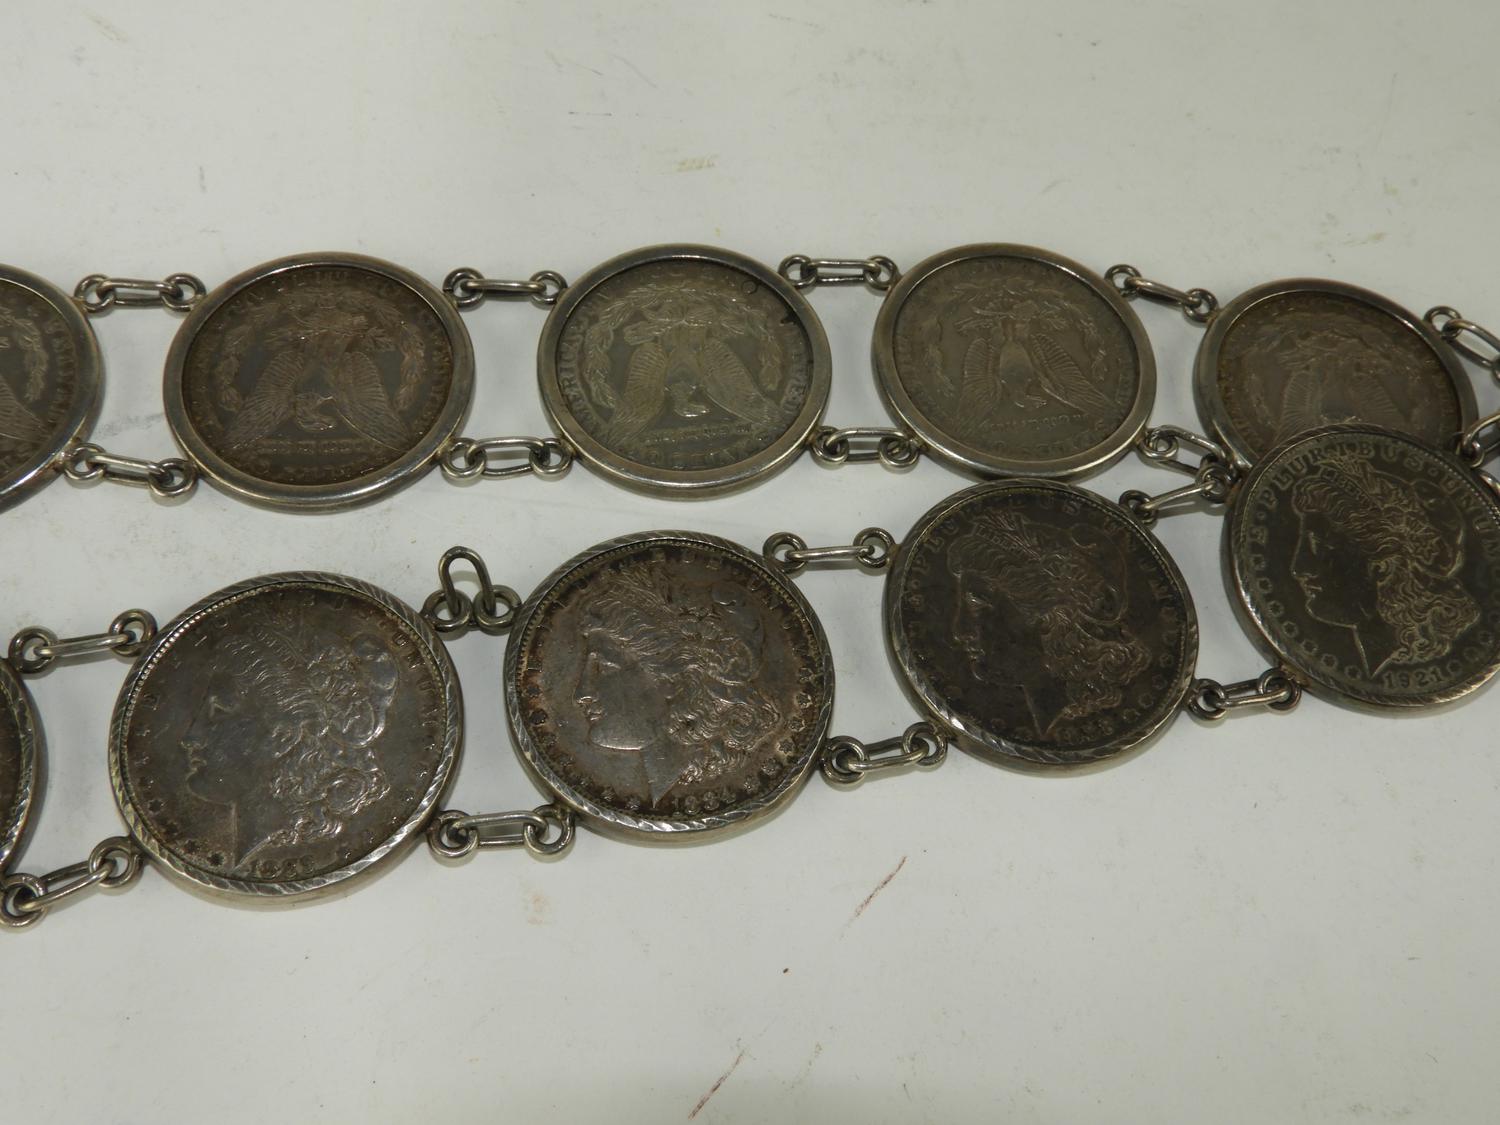 Murrays Auctioneers - Lot 134: Vintage coin belt constructed with 14 ...